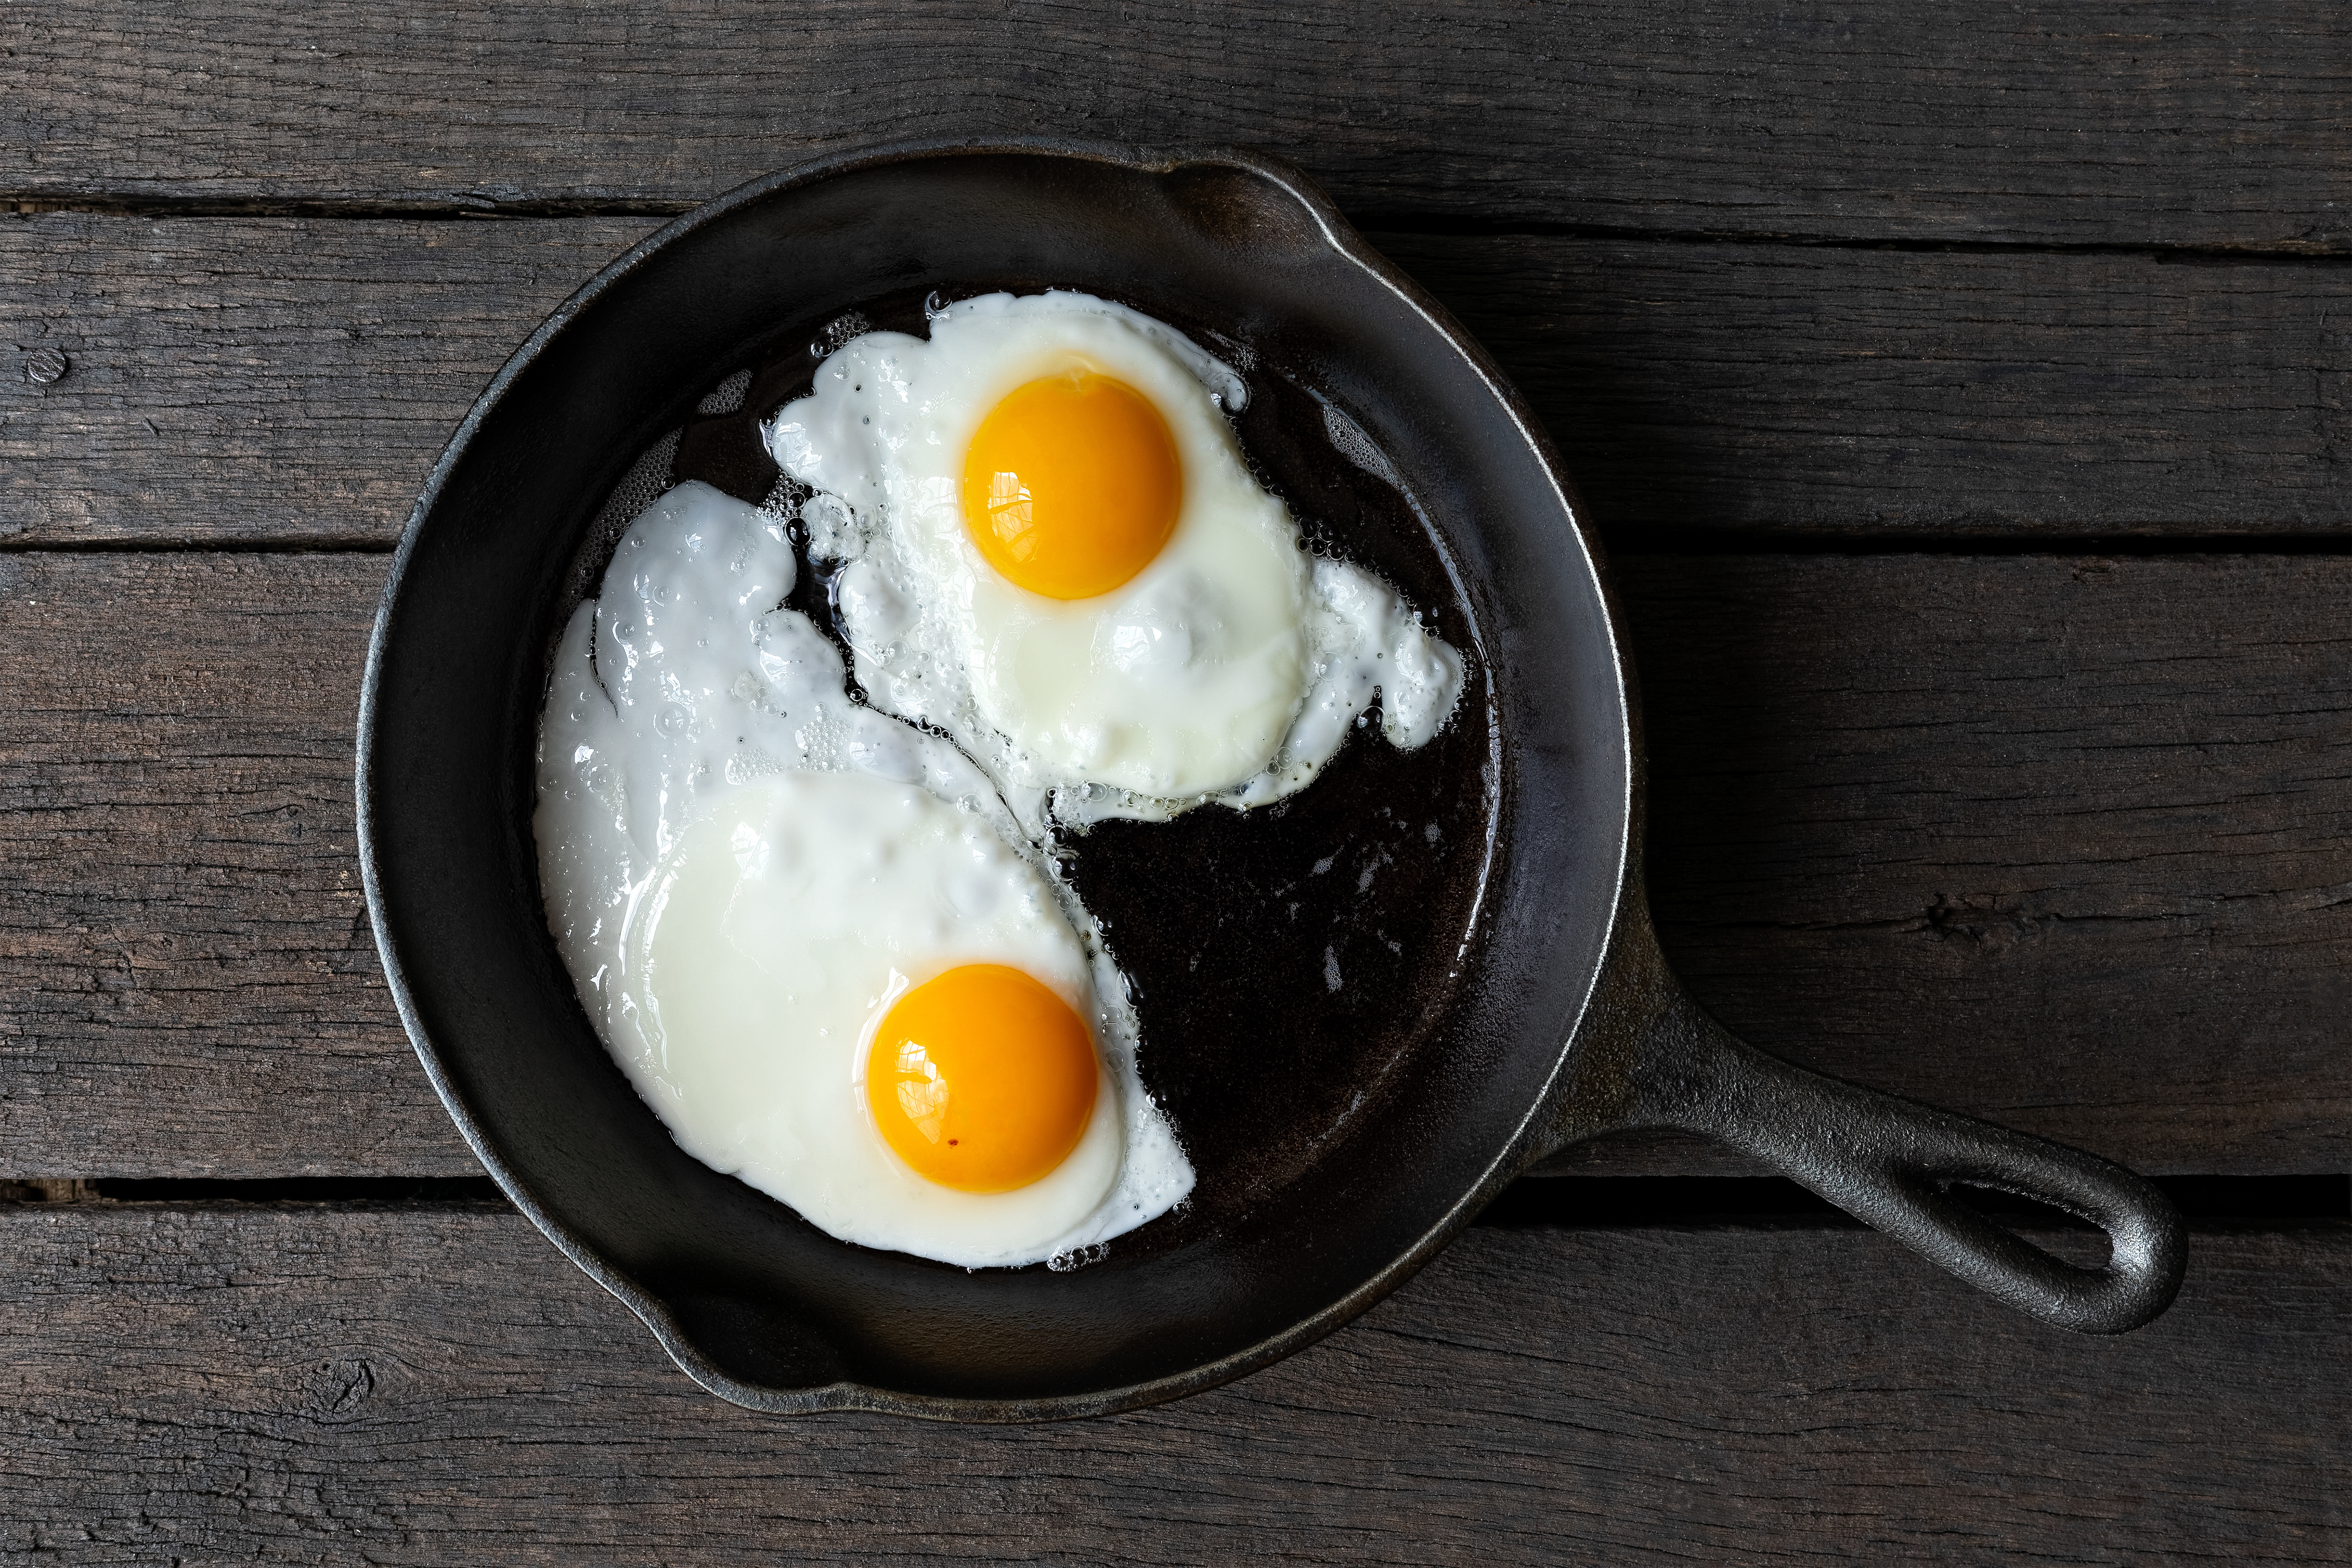 5 Types of foods to avoid cooking in your cast iron skillet